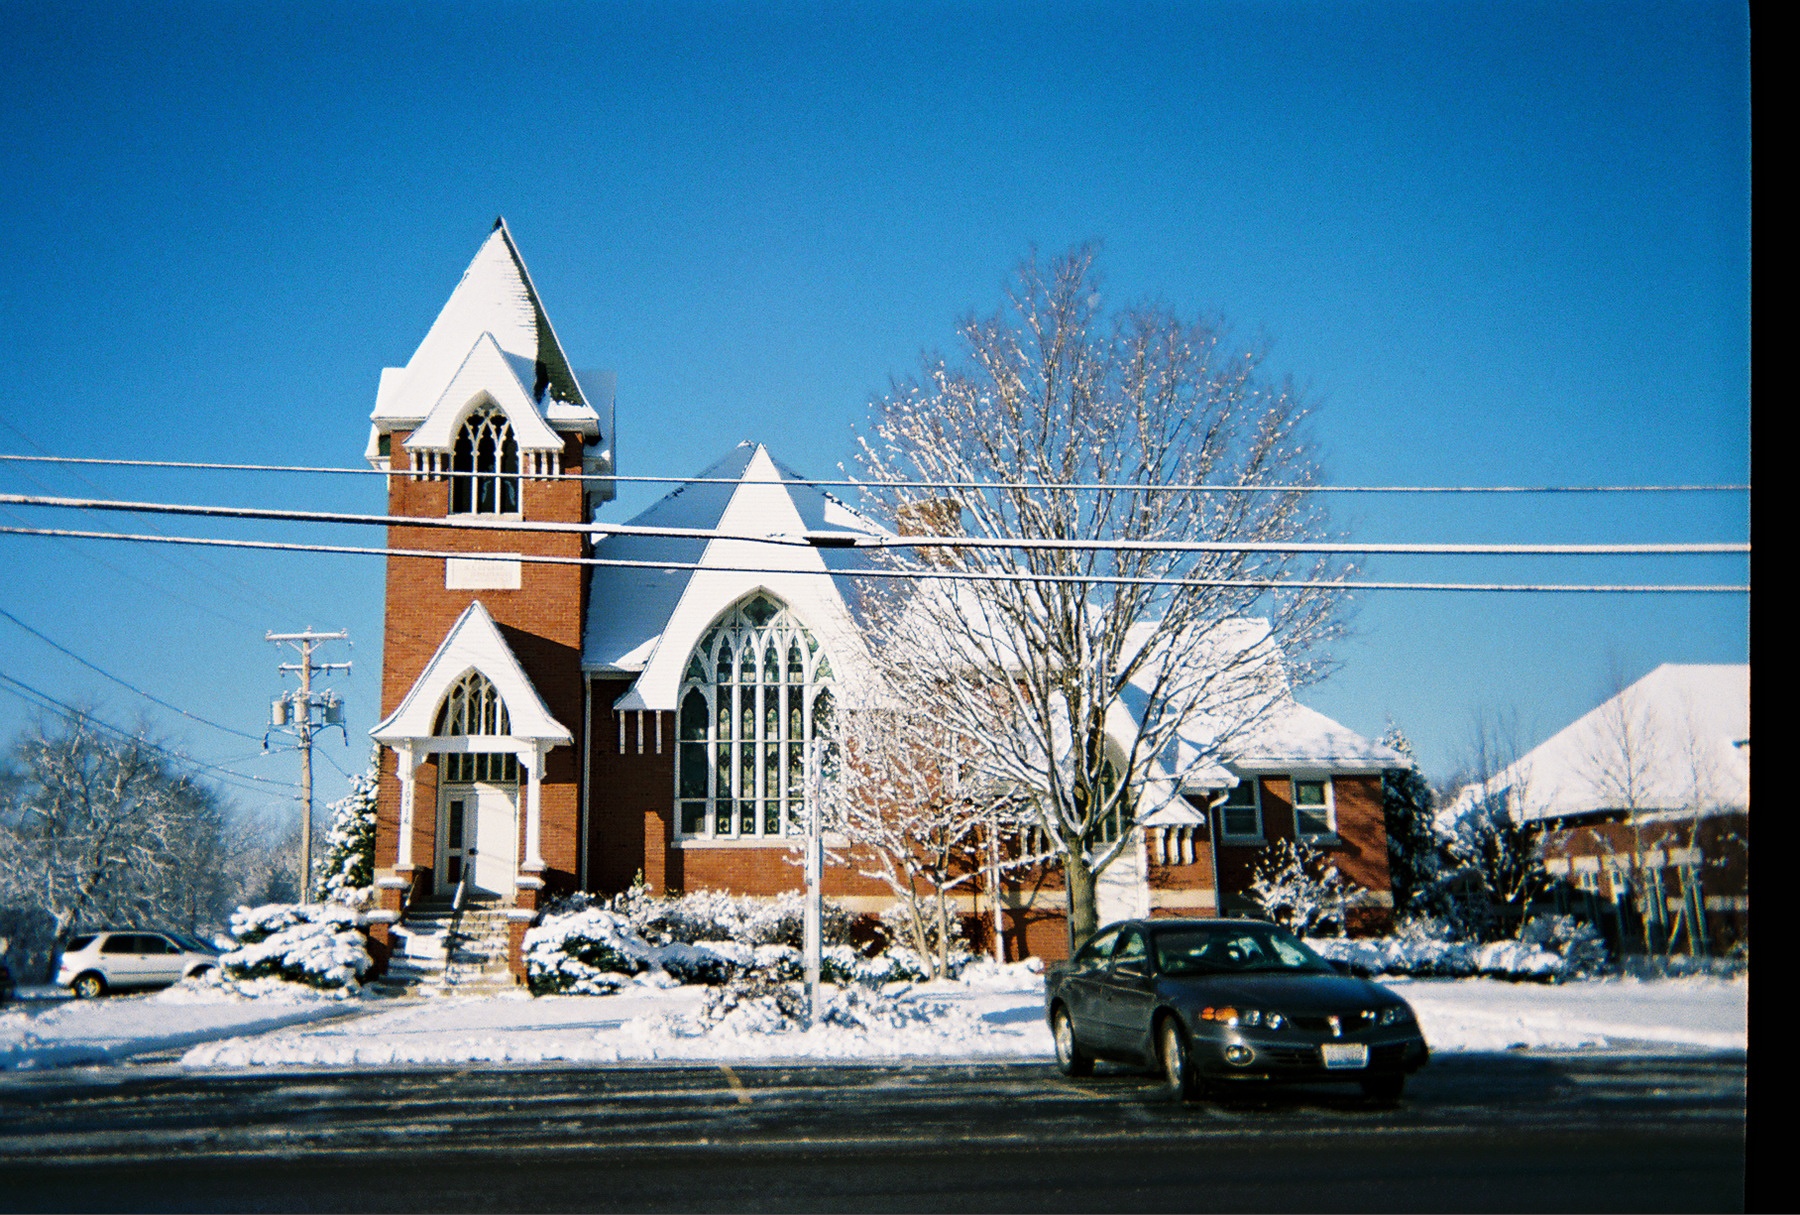 Another view of the Methodest church.